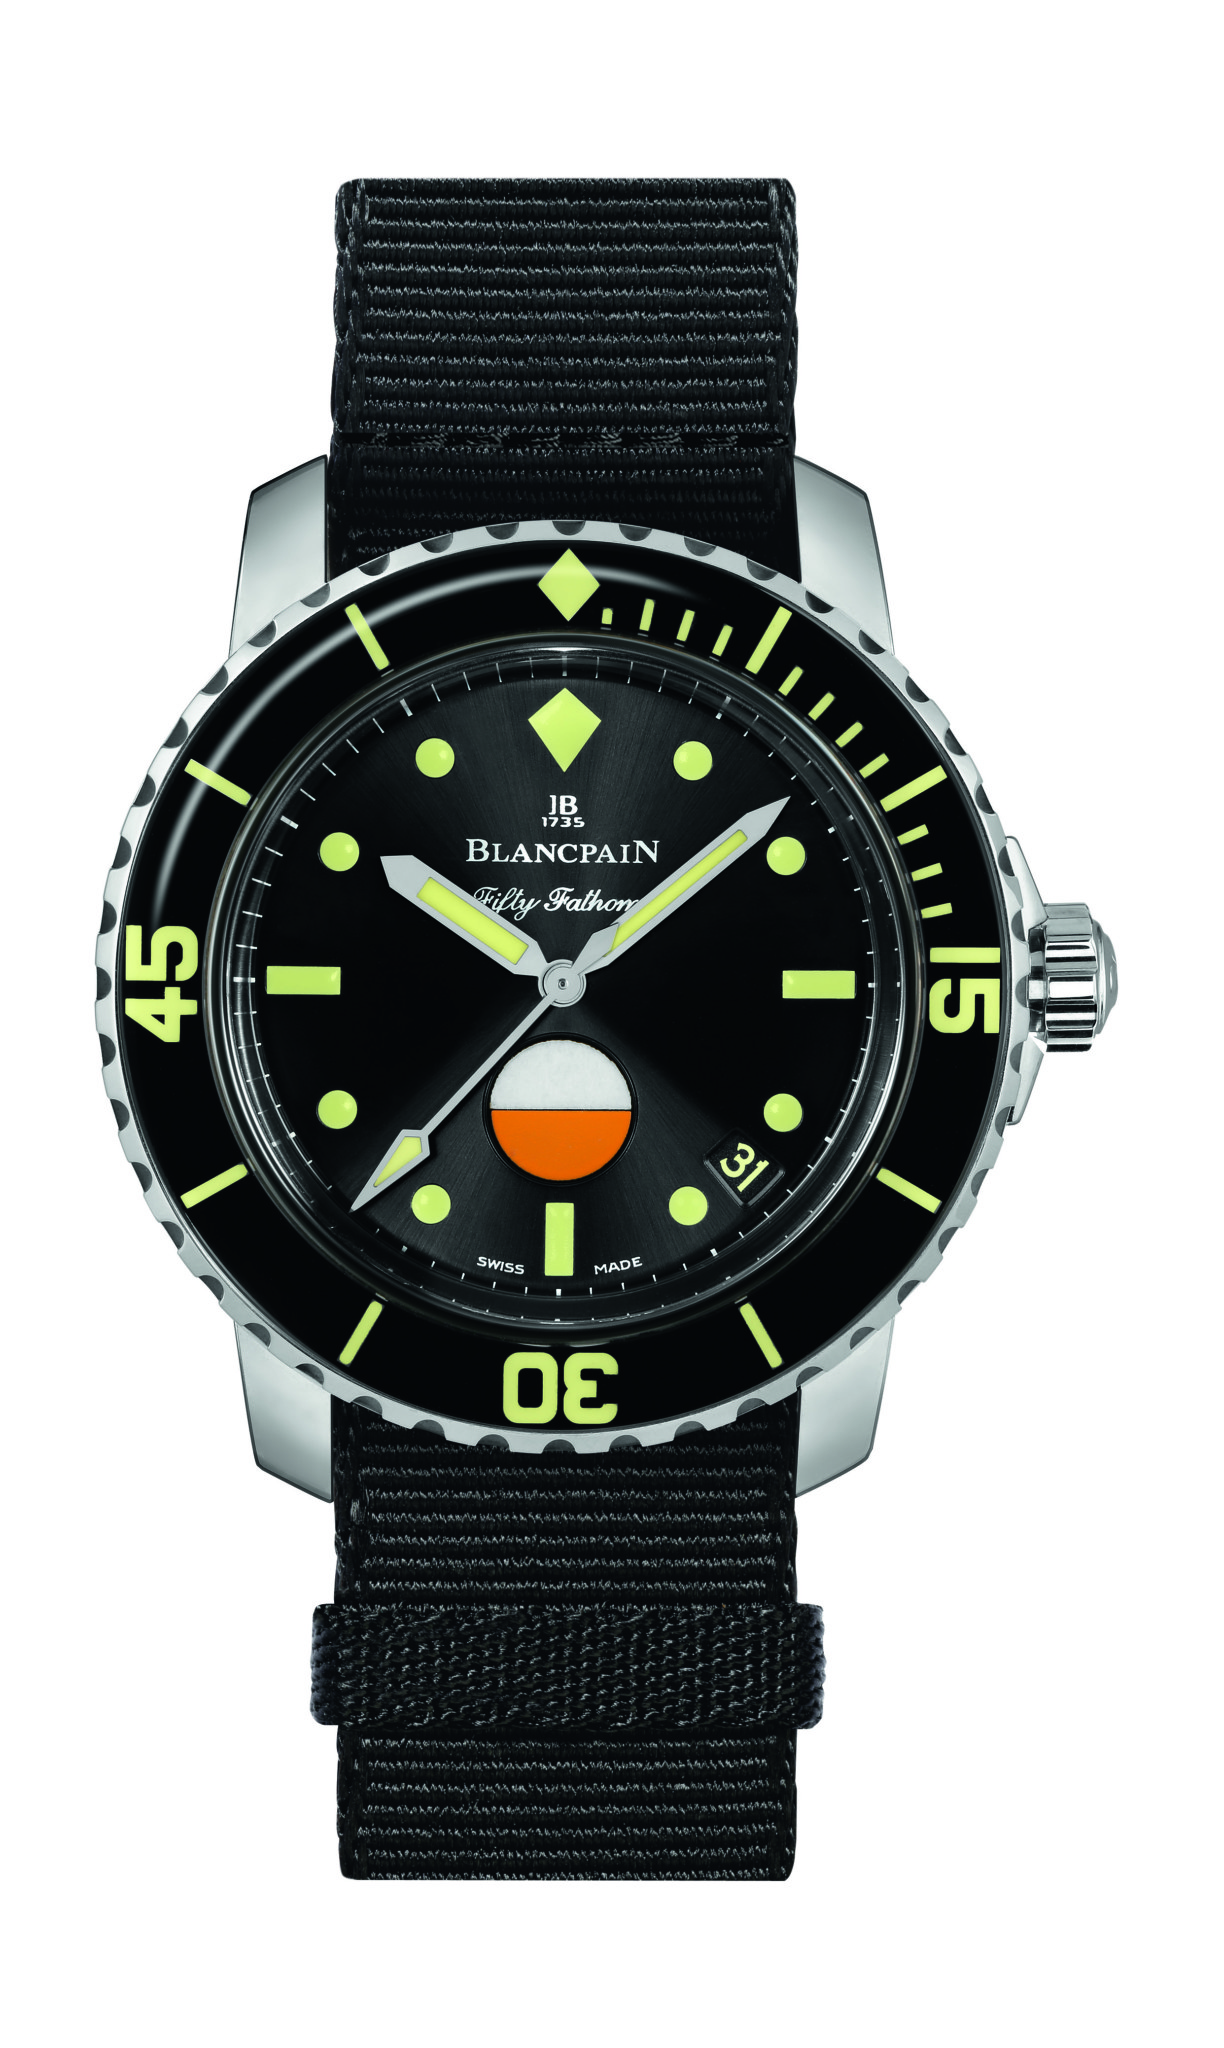 Blancpain_onlywatch_face